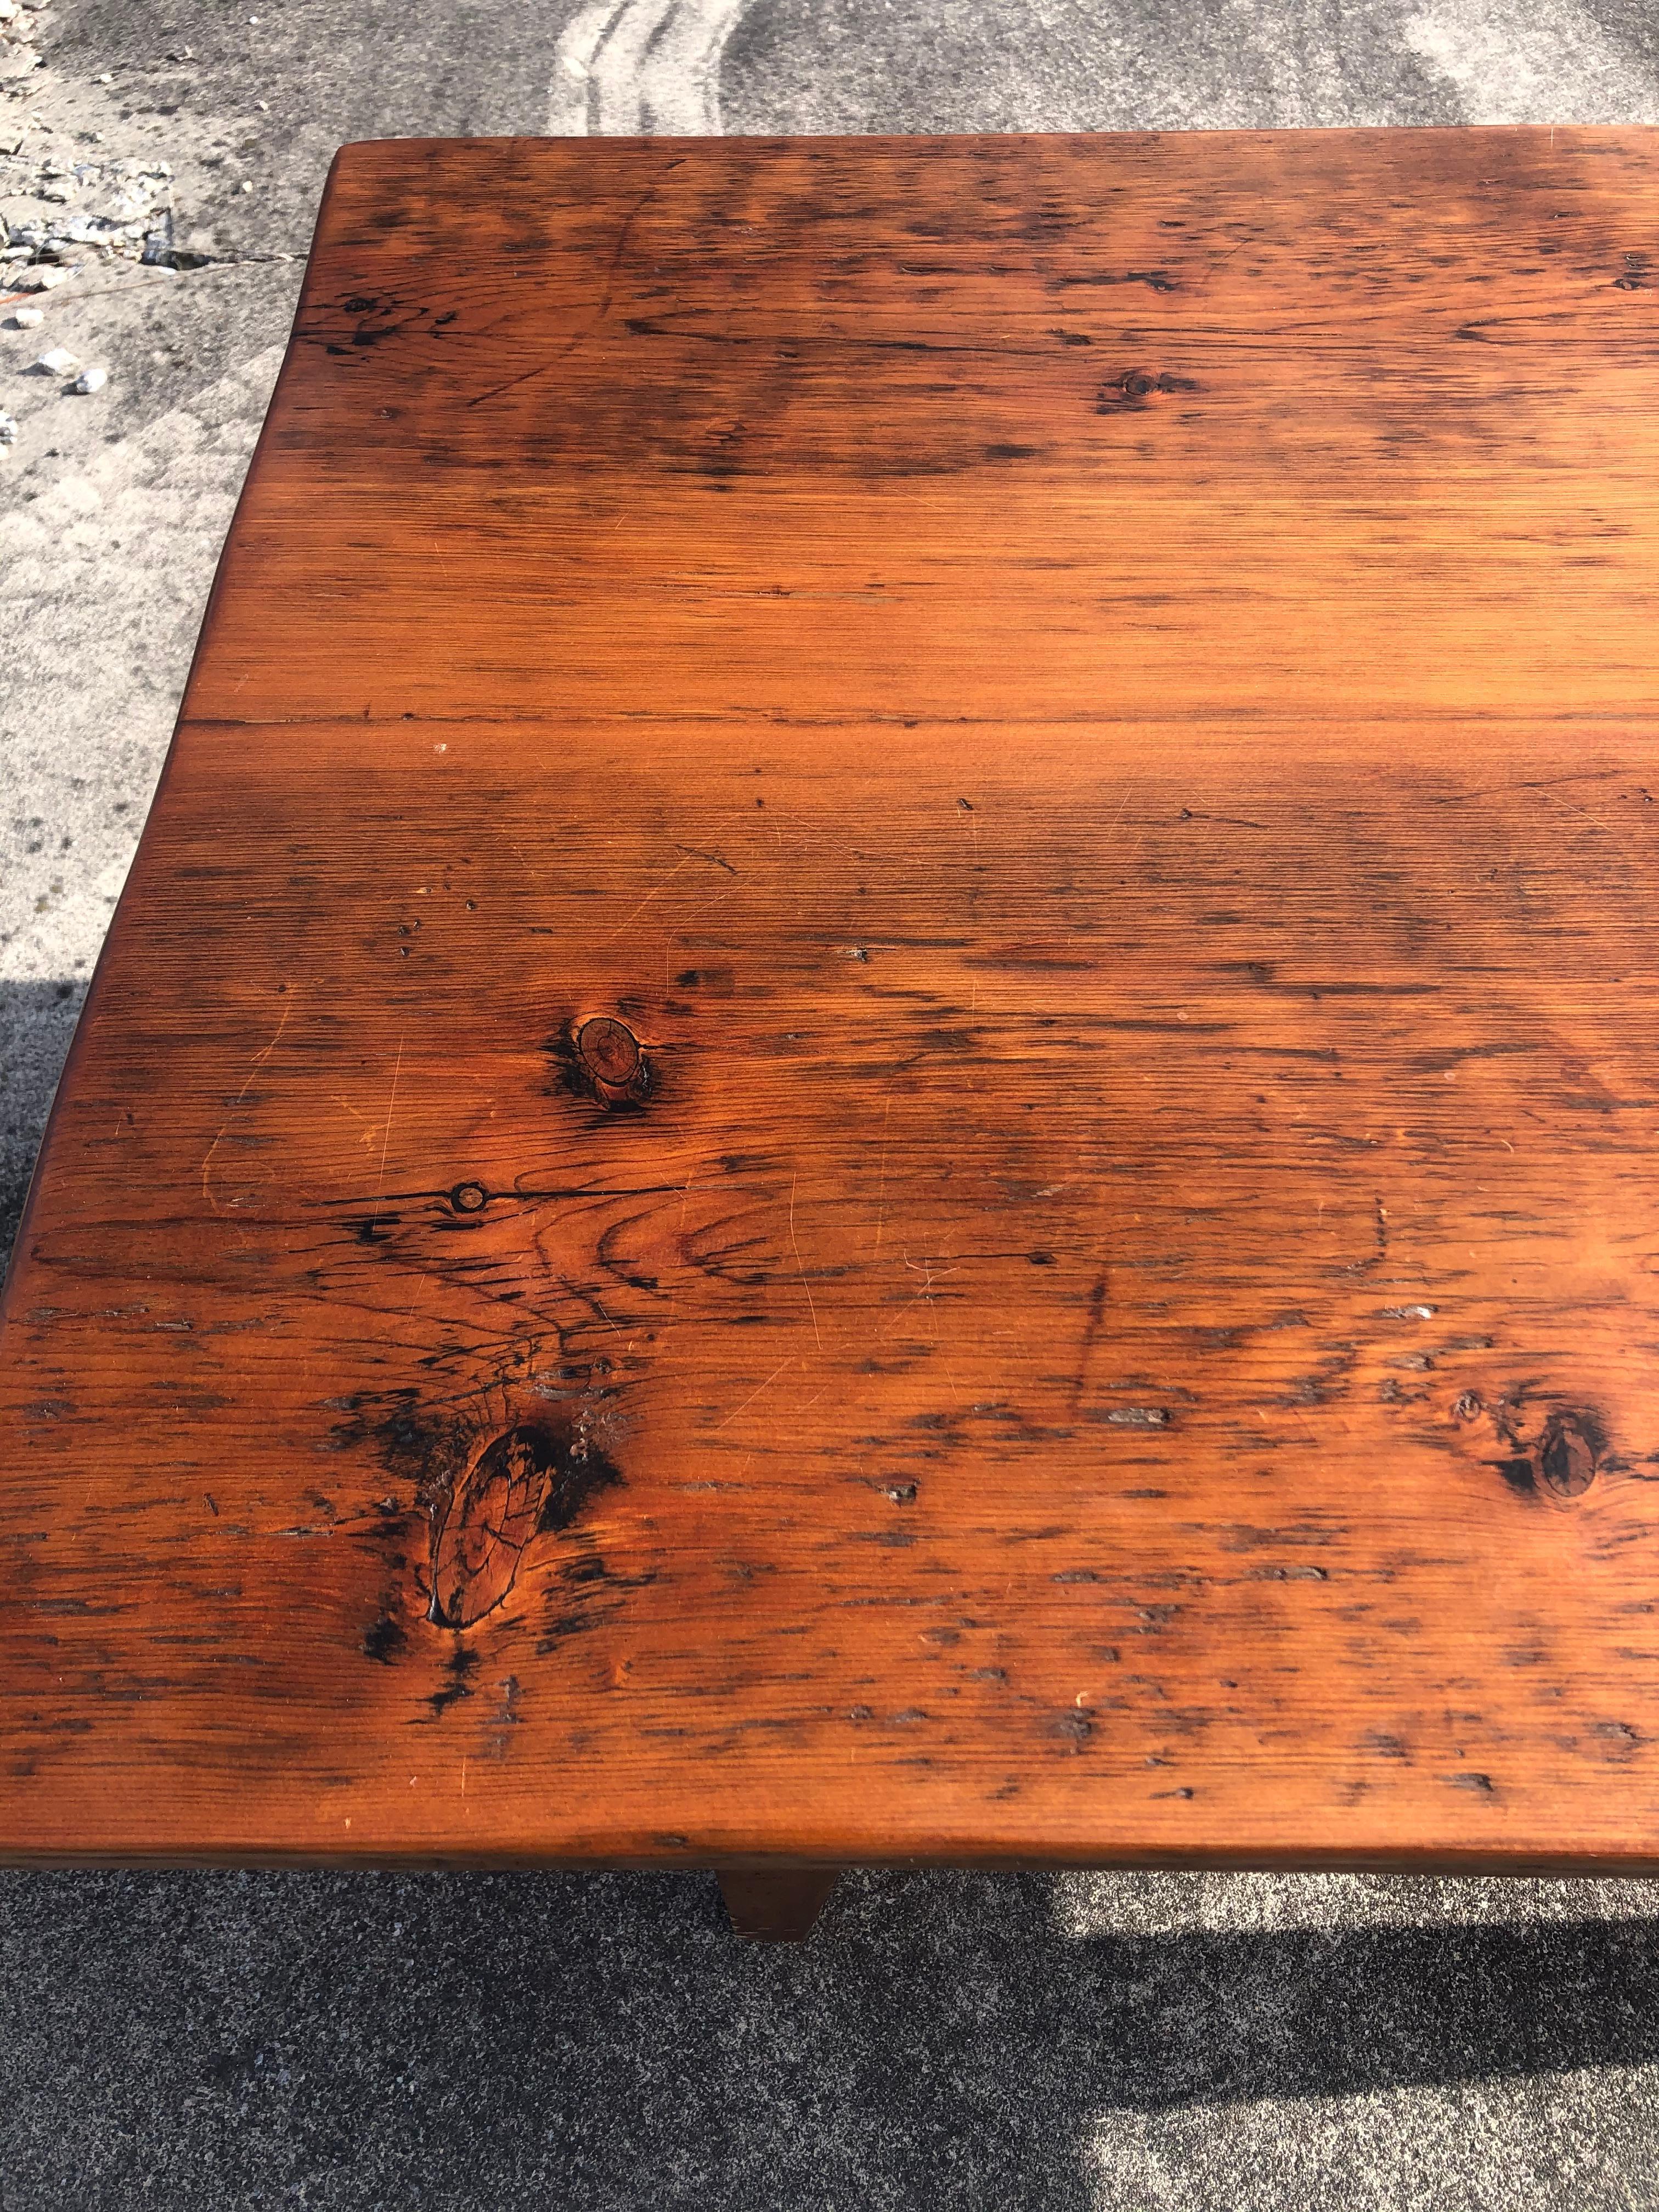 Handsome Rustic Maine Artisan Crafted Pine Coffee Table 2